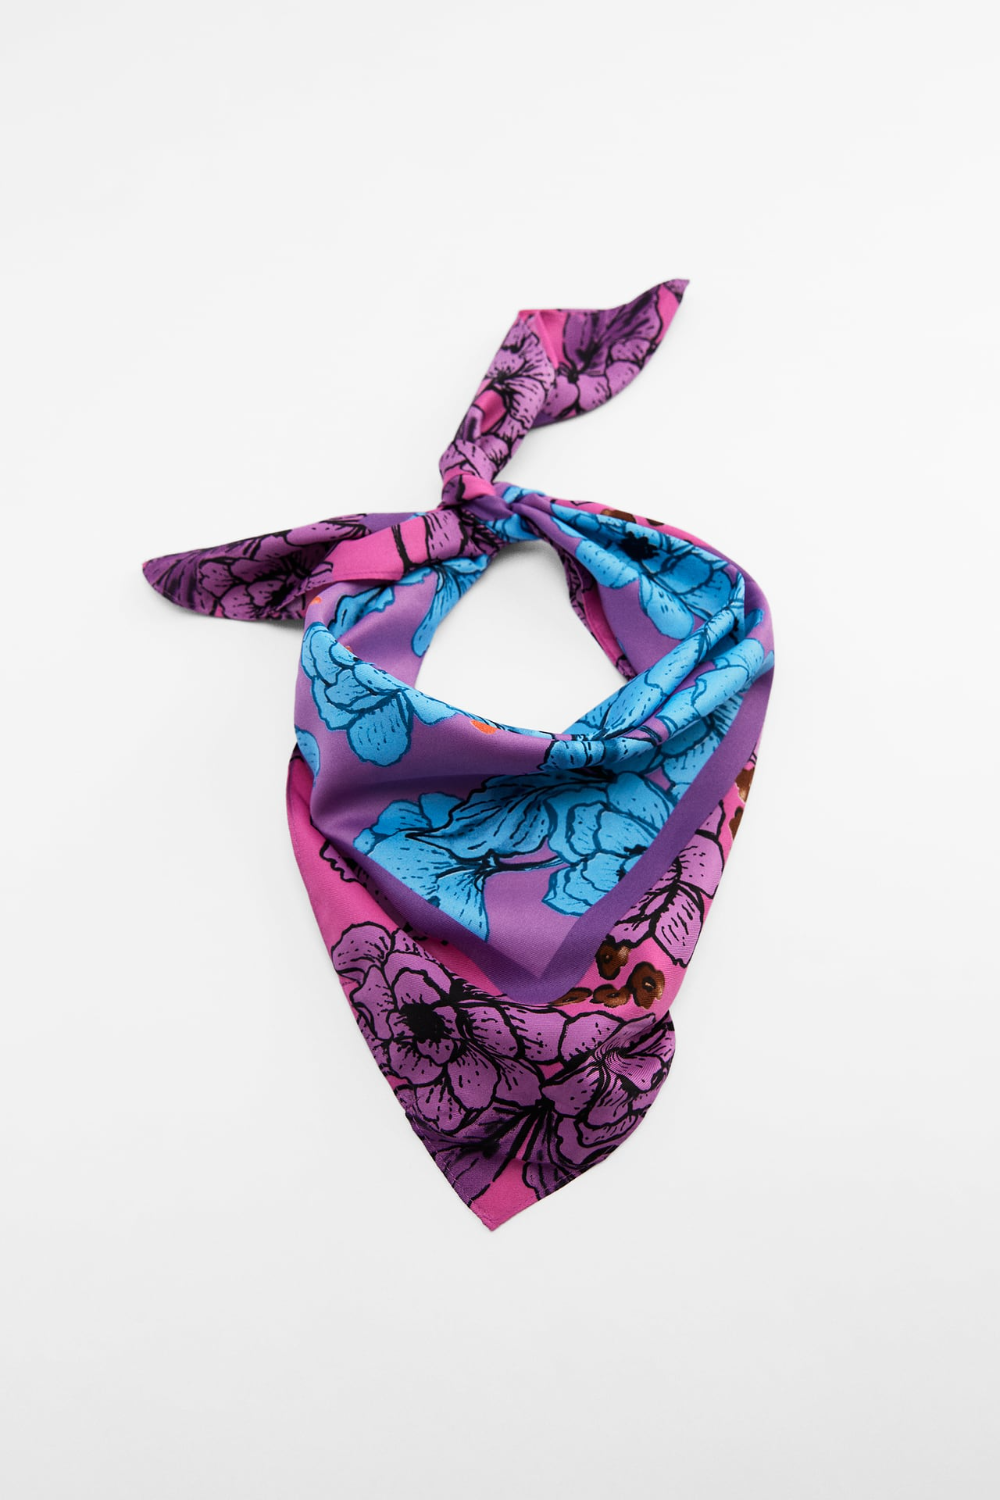 https://flyfiercefab.com/wp-content/uploads/2022/03/Zara-Blue-and-purple-floral-scarf.png